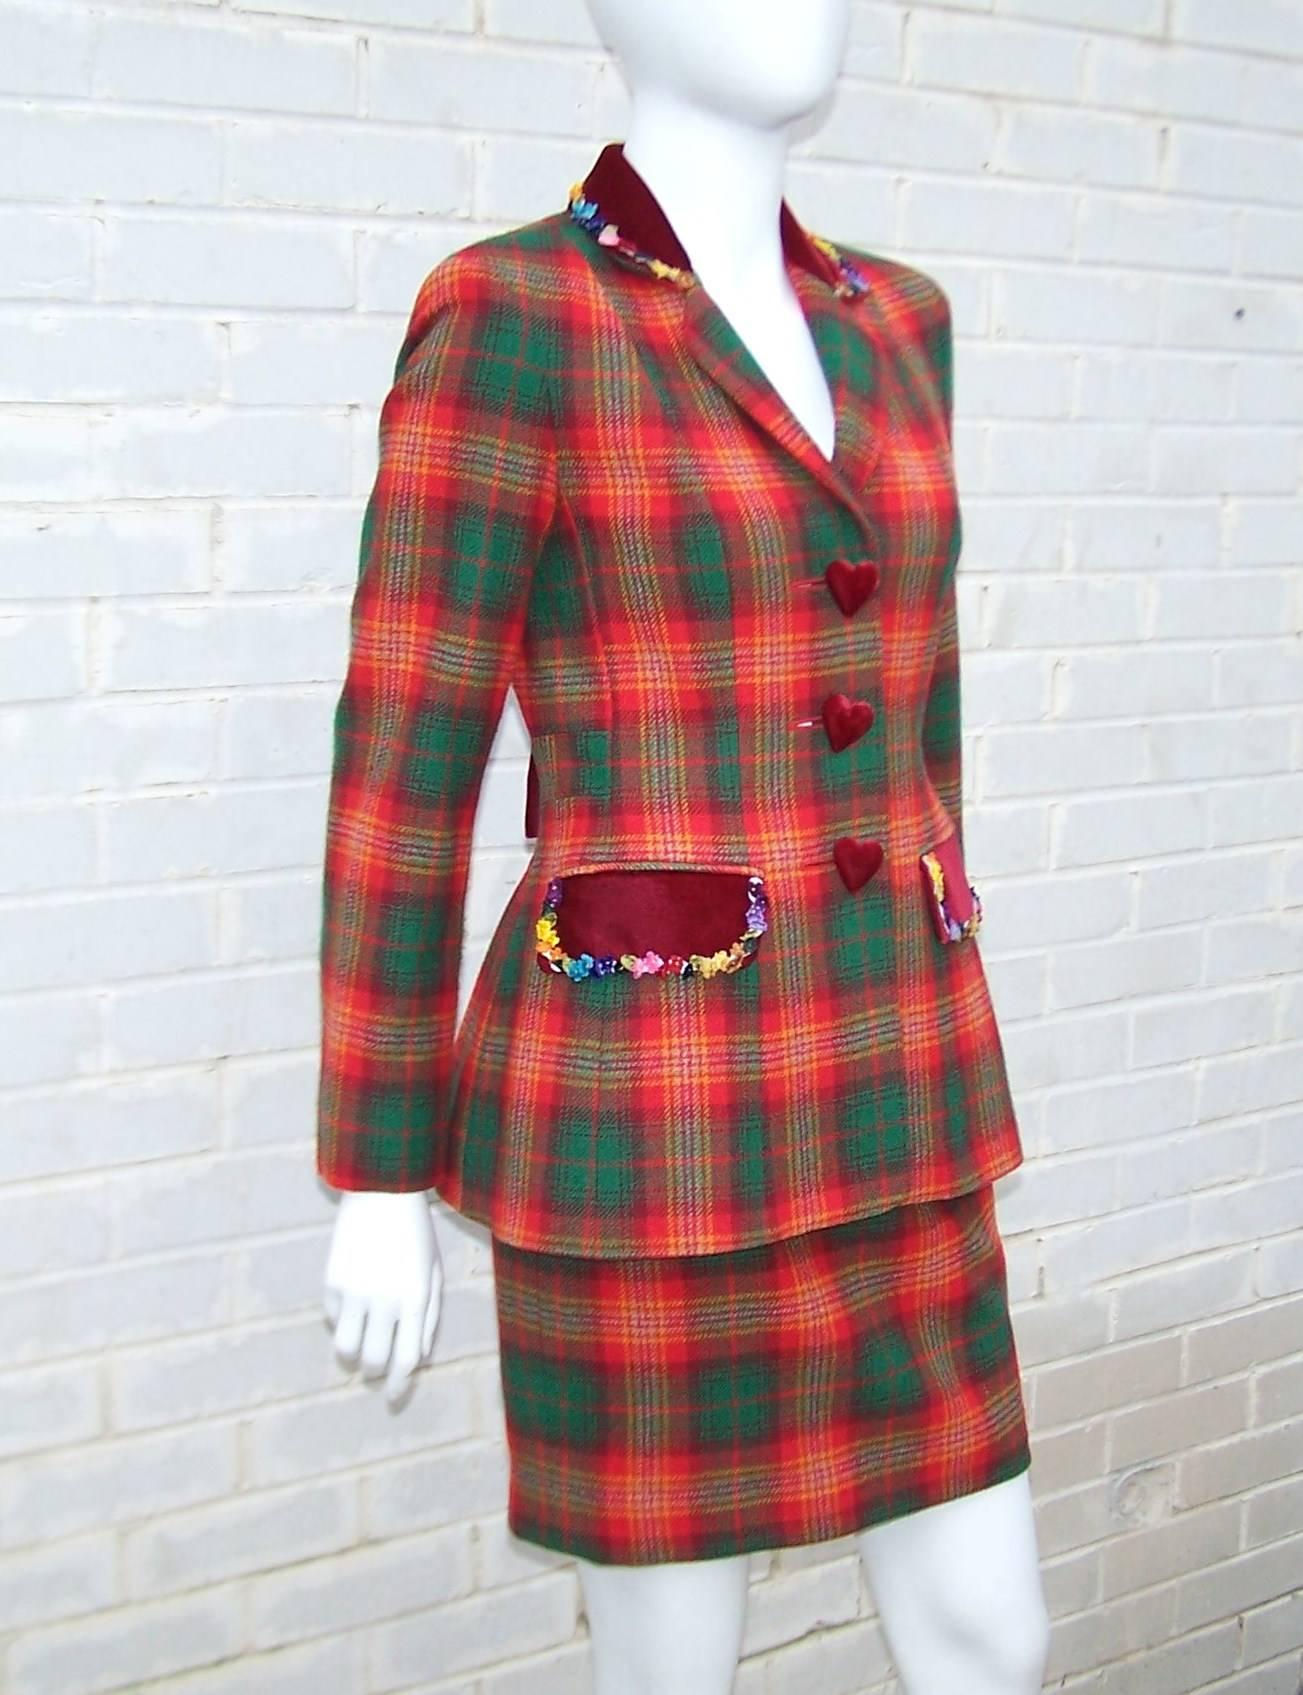 Franco Moschino has whipped up an adorable skirt suit with a mix of traditional wool tartan red and green plaid accented with slightly contrasting ruby red velvet.  True to Moschino's whimsical and sometimes irreverent style, he tweaks the